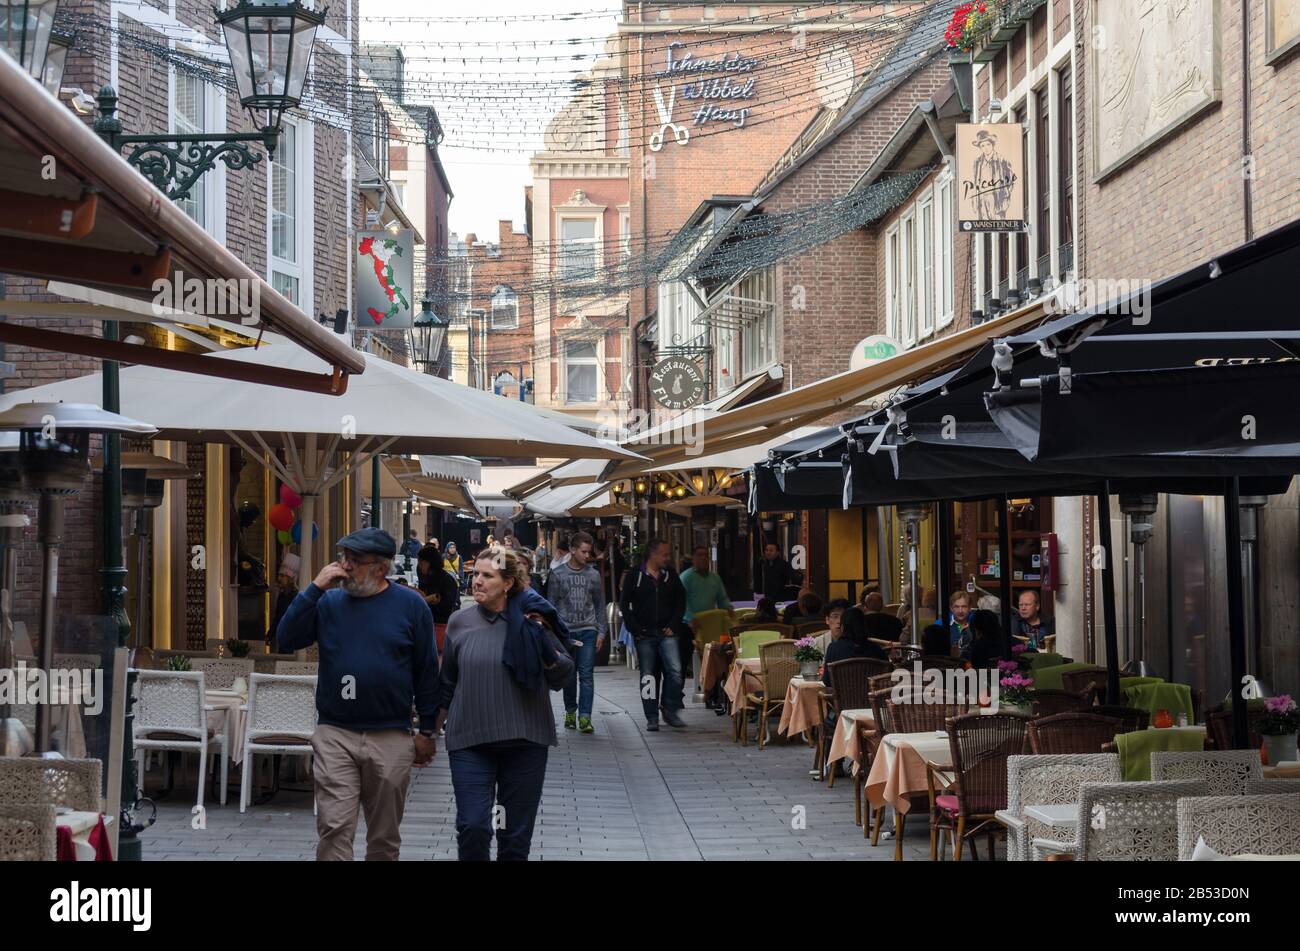 Dusseldorf Altstadt, Nrw, Germany - September 21, 2014: View of the famous Schneider Wibbel alley in the old town of Düsseldorf. In this small street Stock Photo